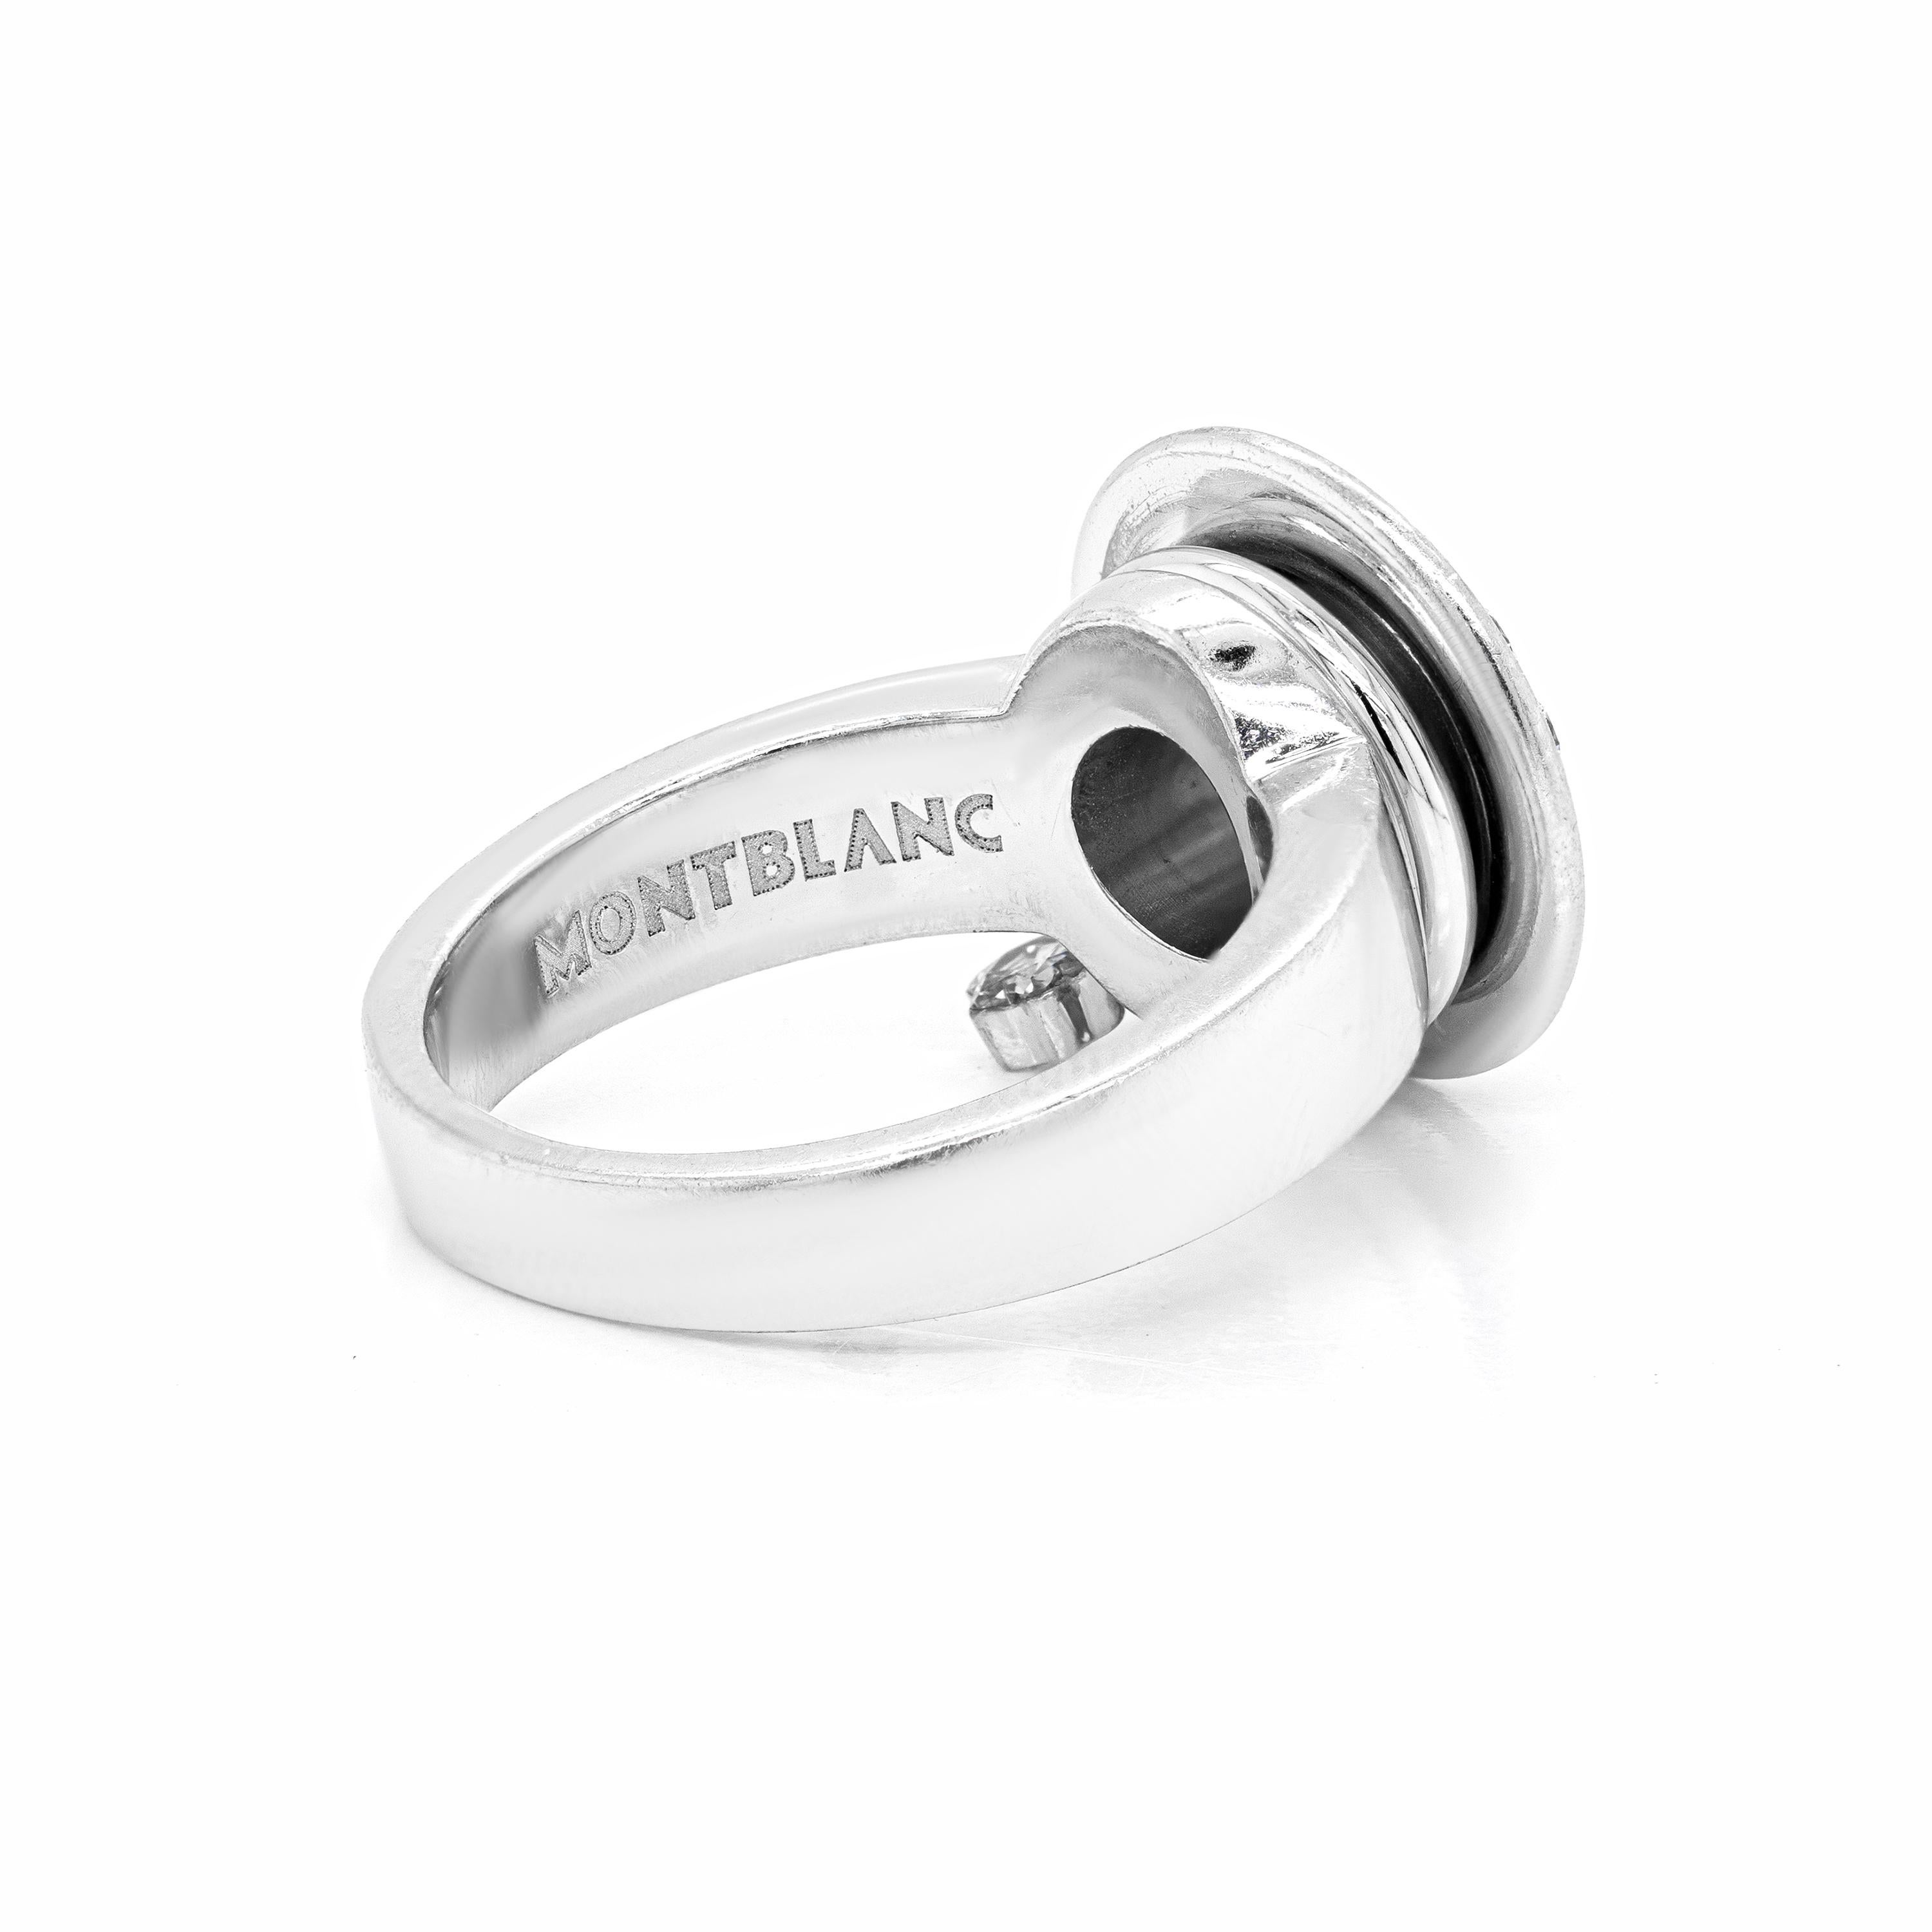 This gorgeous cocktail ring by the famous luxury house Montblanc from their 'La Dame Blanche' Collection is crafted from 18 carat white gold. The ring is beautifully inlaid with 37 round brilliant cut diamonds, all pavé set on an 18 carat white gold